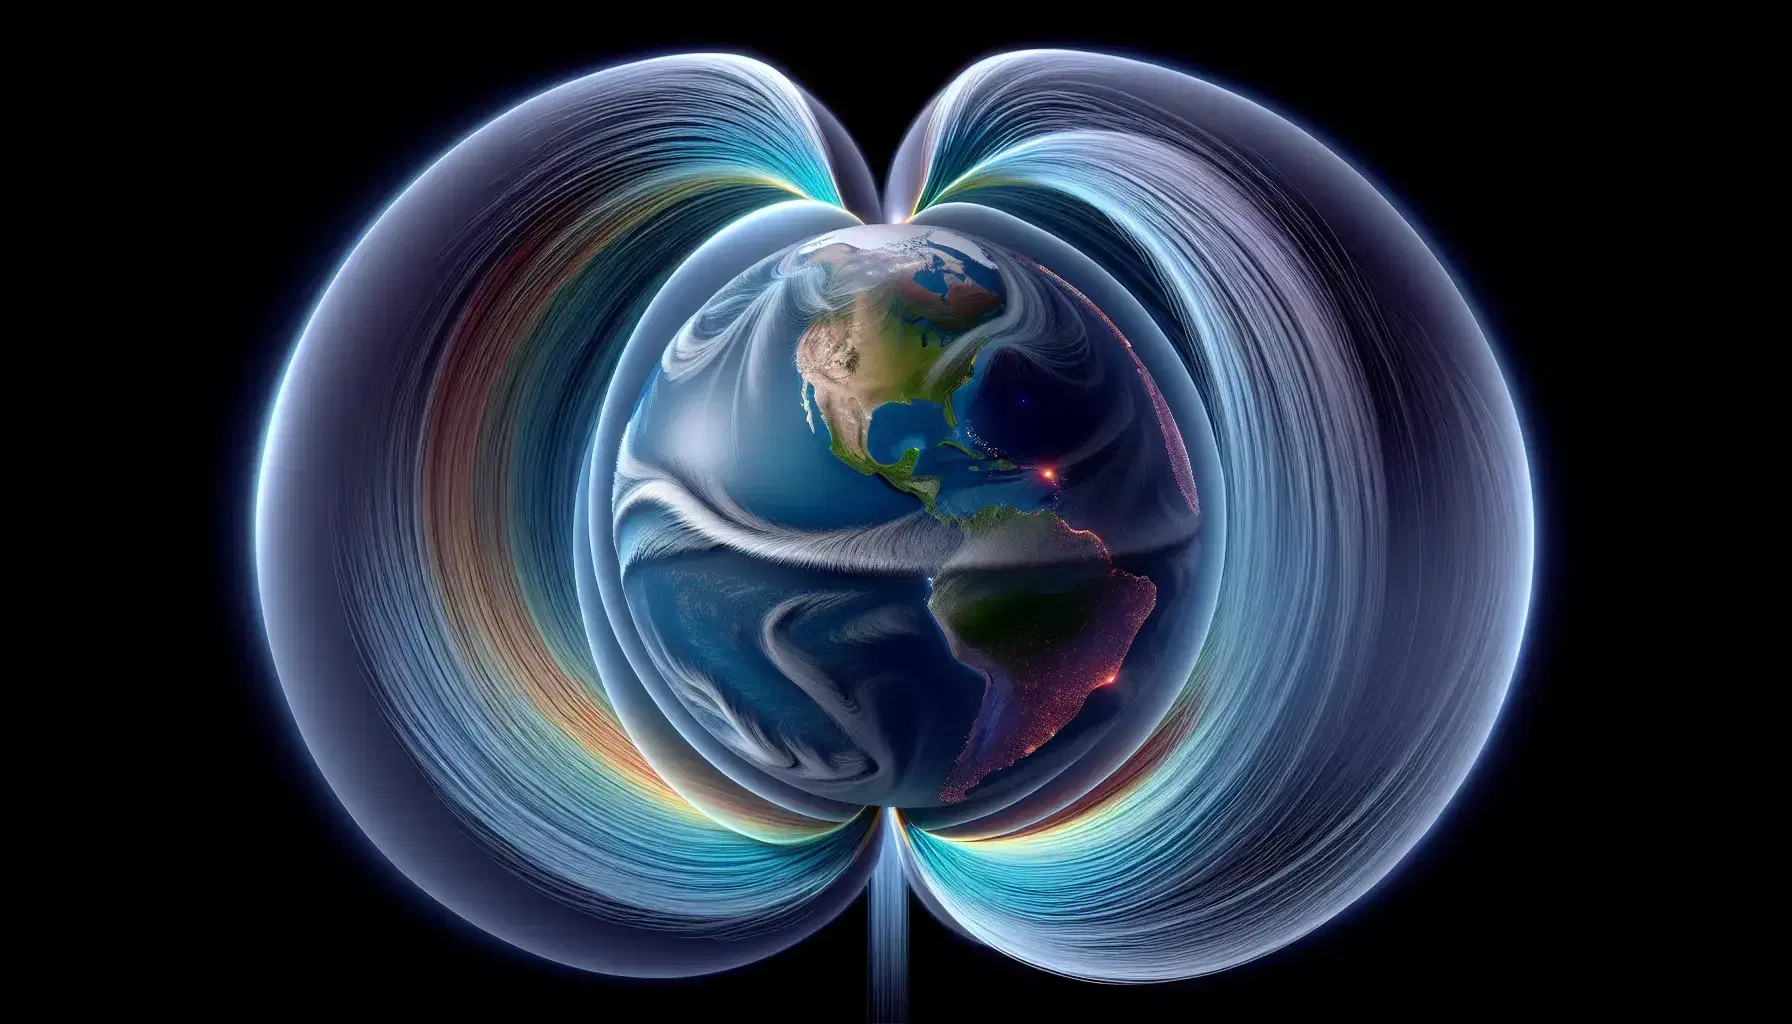 Three-dimensional view of Earth from space with magnetosphere, Van Allen belts and magnetic field lines on starry background.